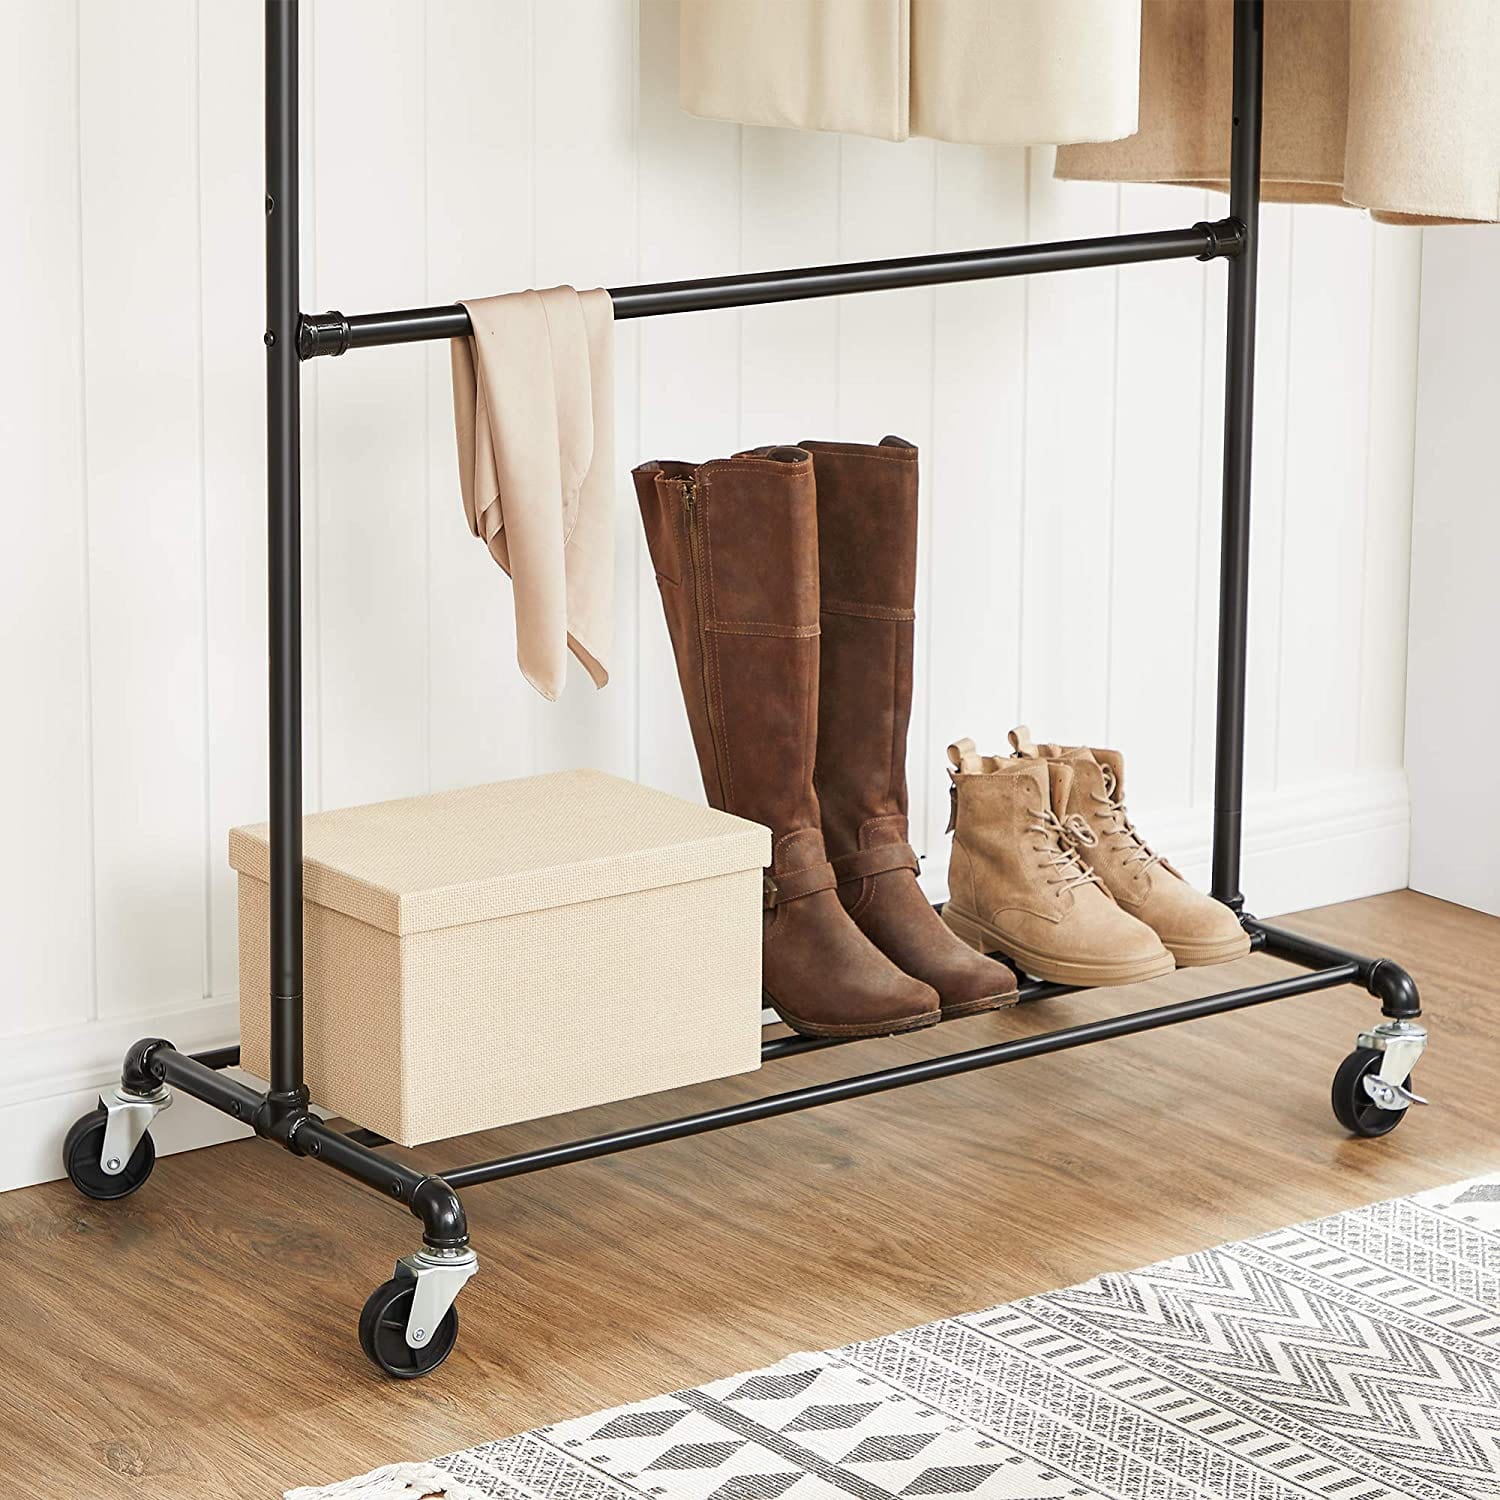 Industrial Clothes Rack on Wheels Maximum load of 110 Kg